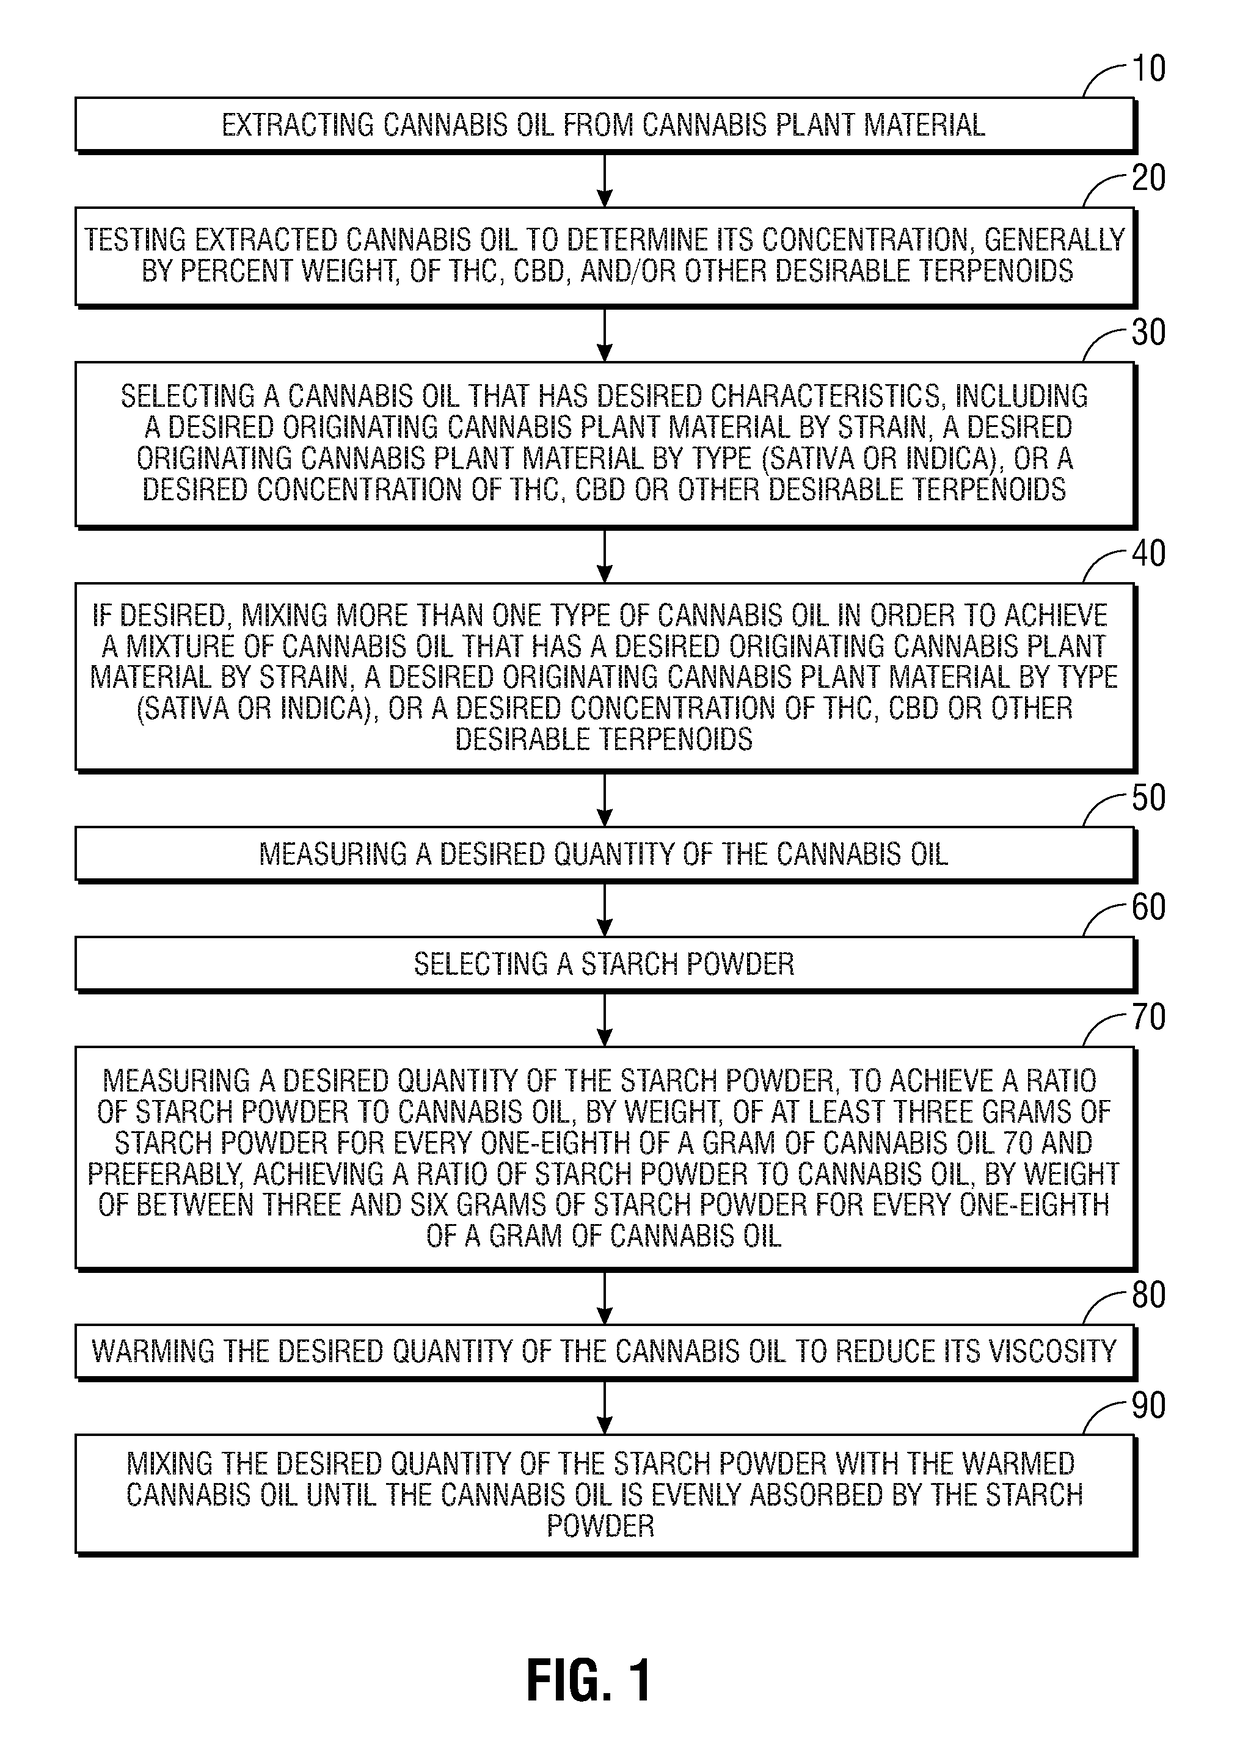 Method for conducing concentrated cannabis oil to be stable, emulsifiable and flavorless for use in hot beverages and resulting powderized cannabis oil